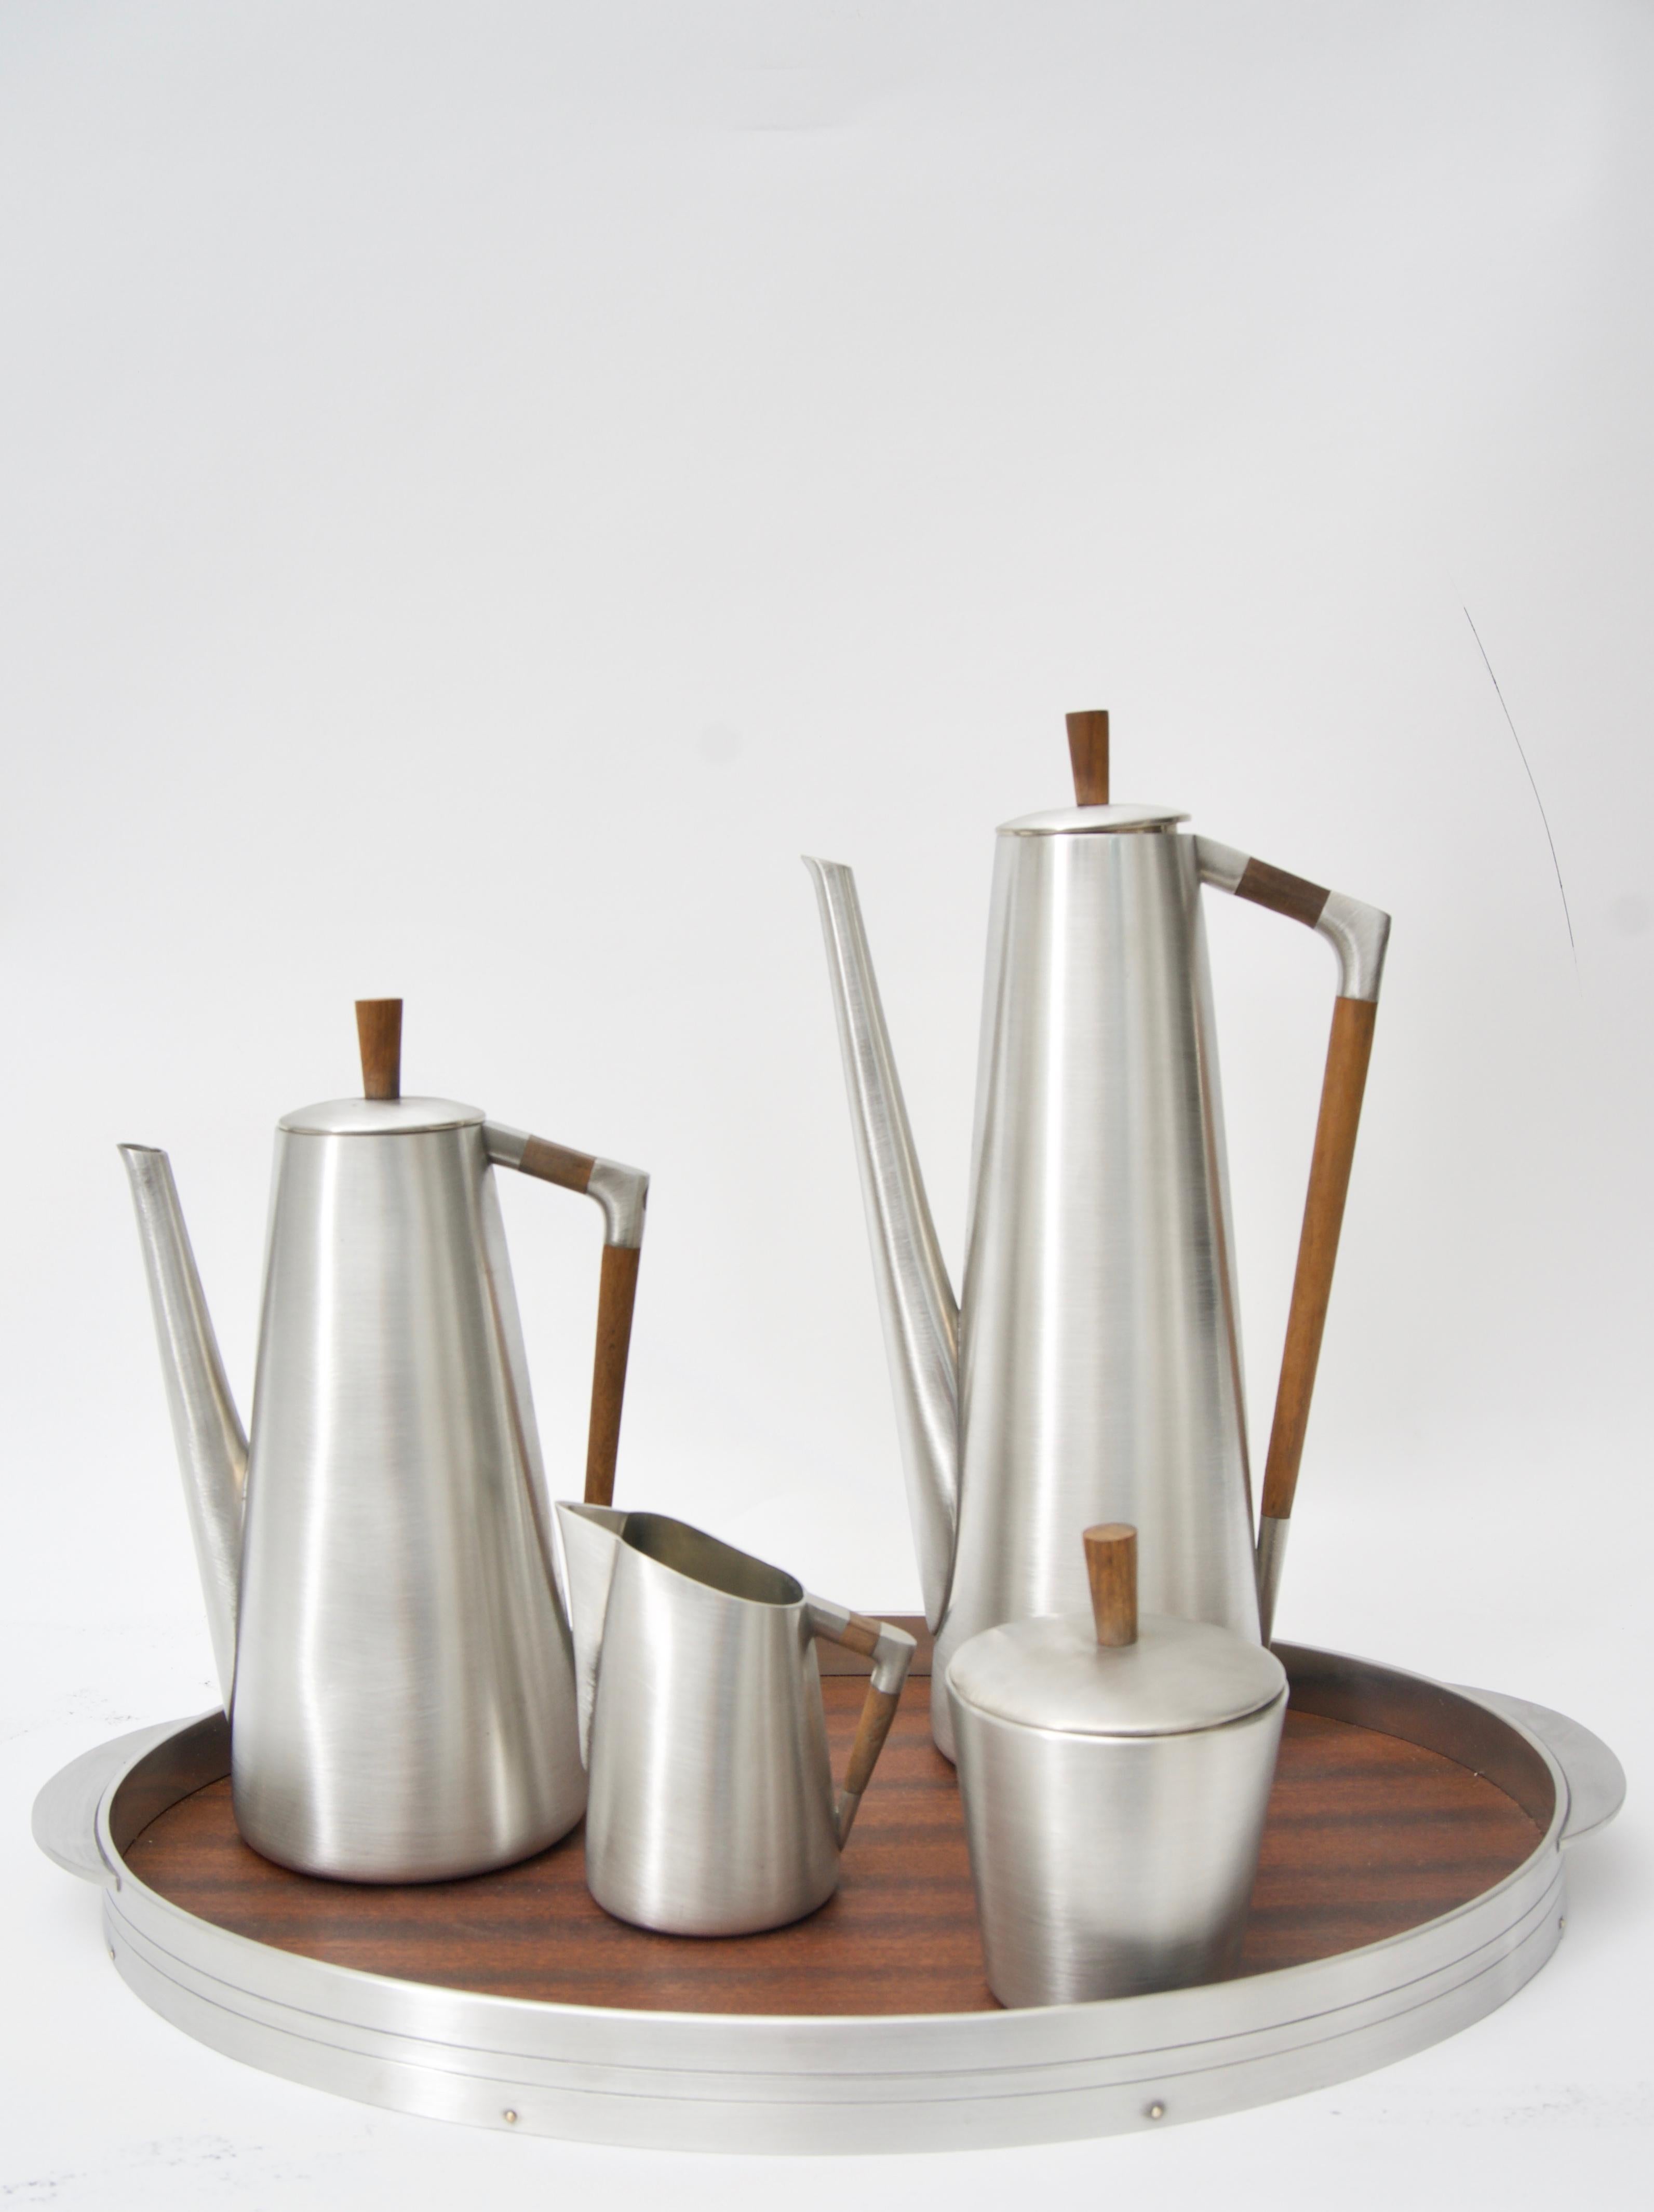 This stylish pewter coffee and tea service is by the KMD Royal Holland and will make a definite statement with its clean lines, form and use of materials. 

Note: Dimensions of the coffee pot are 12.25